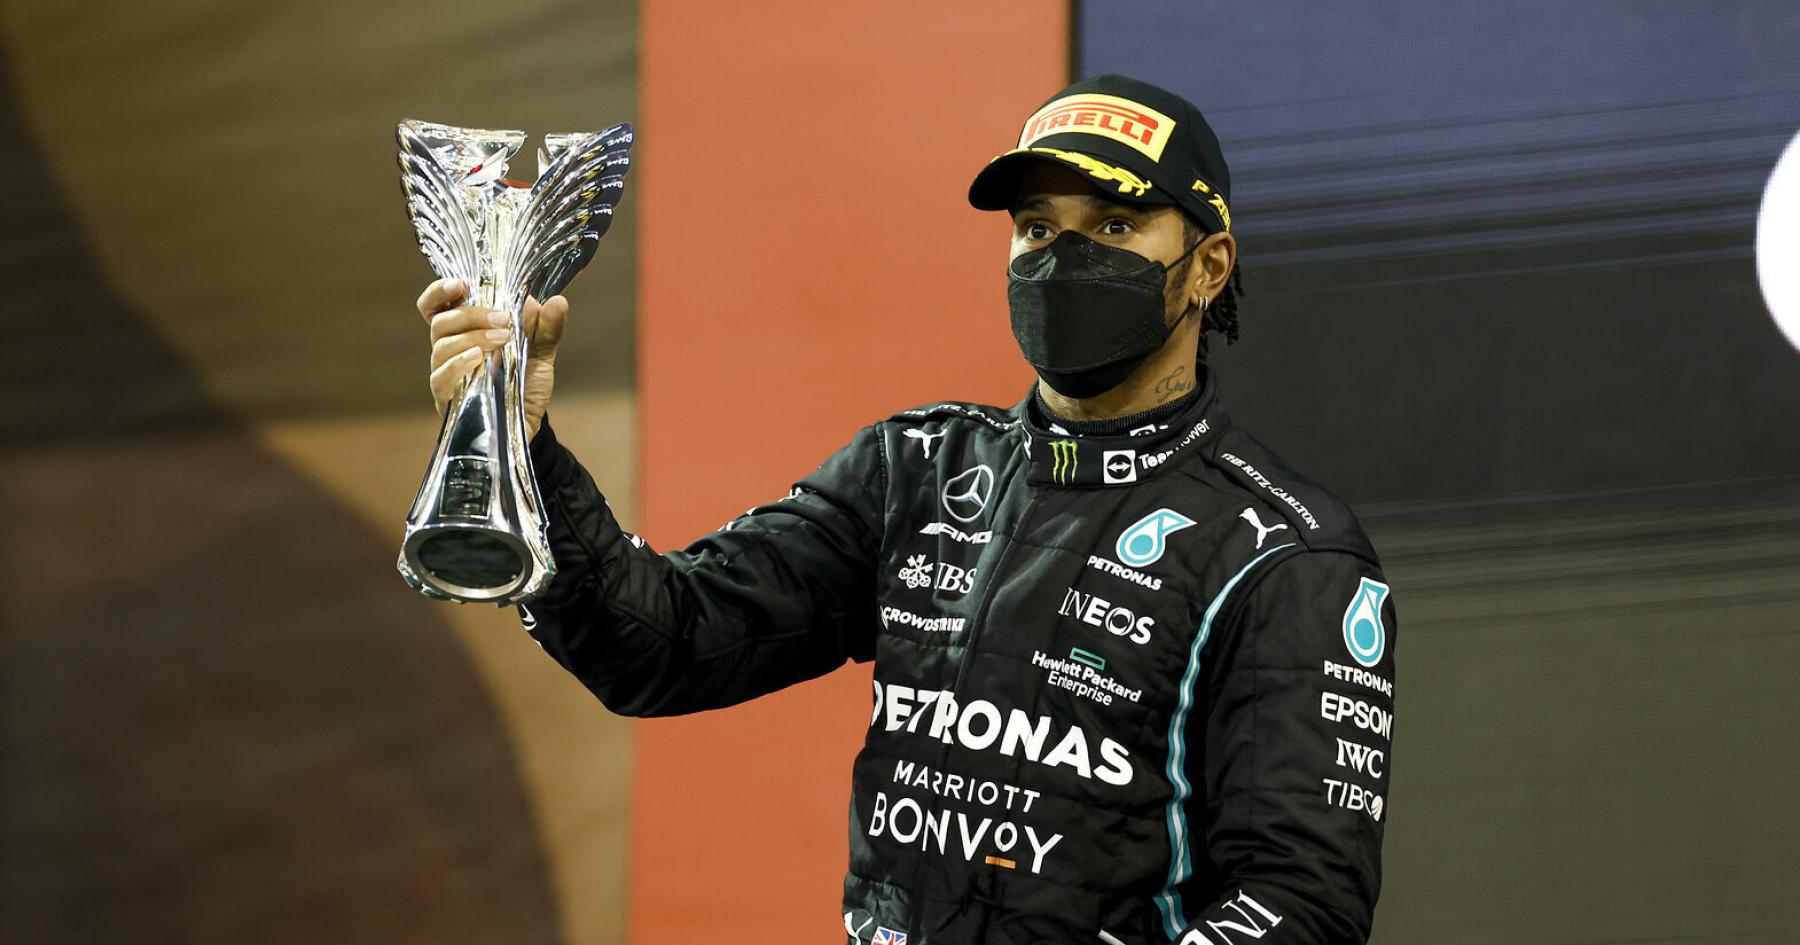 Hamilton Accepts Defeat: Finding Peace Amidst Controversy in the 2021 Championship Race